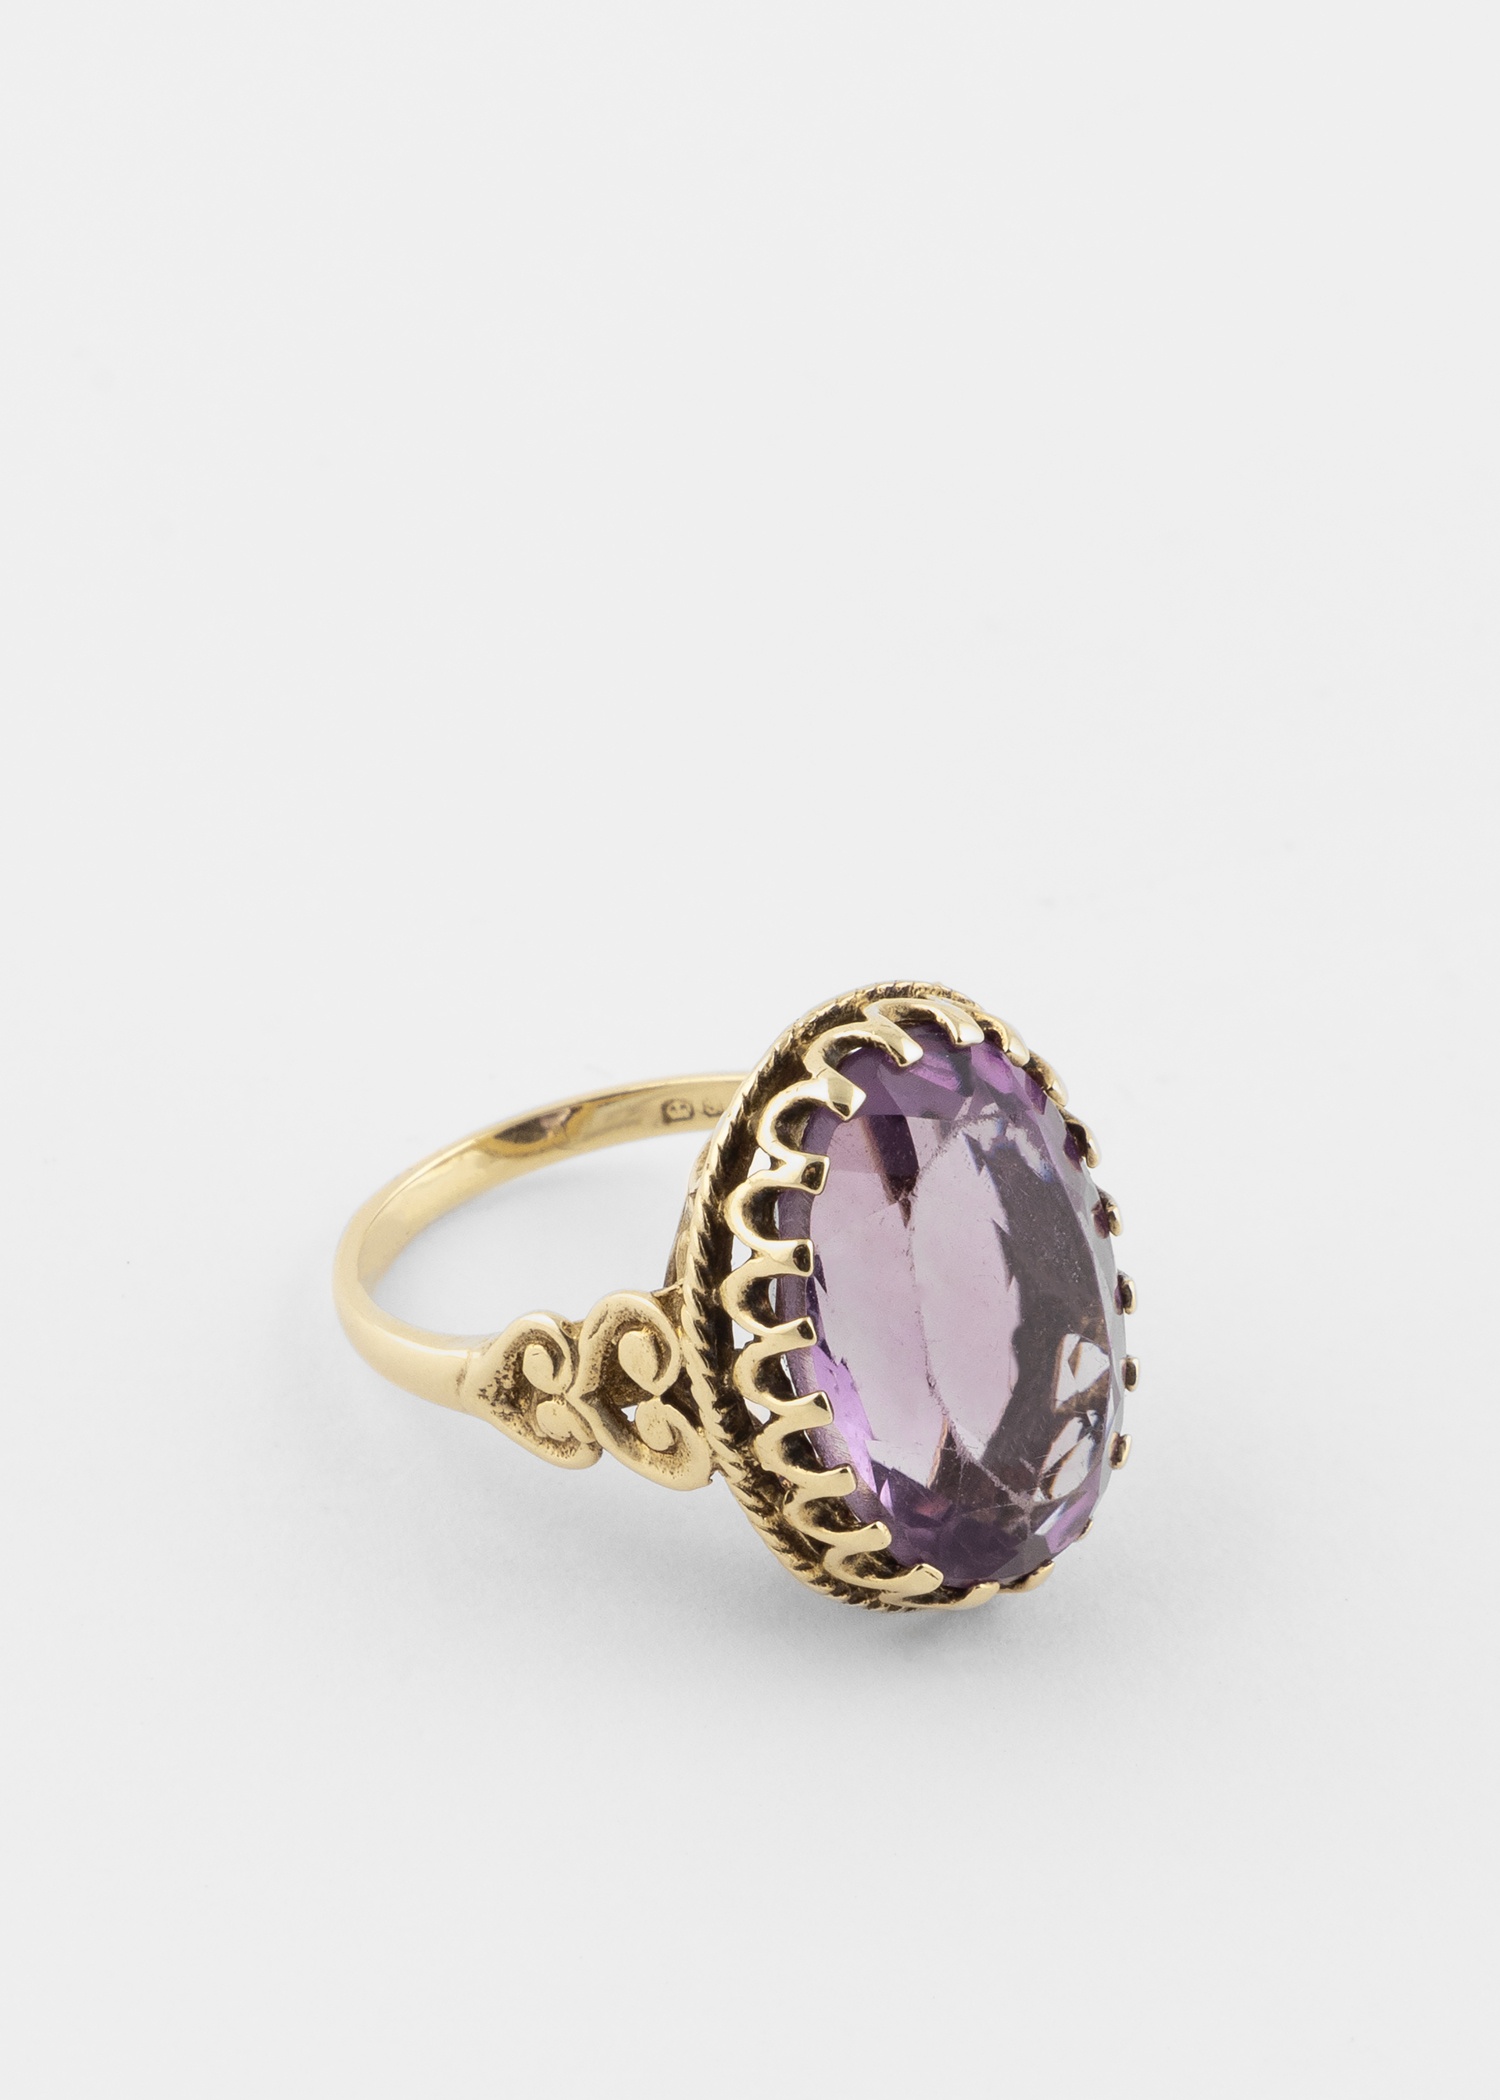 'Enormous Amethyst' Cocktail Ring by Baroque Rocks - 2